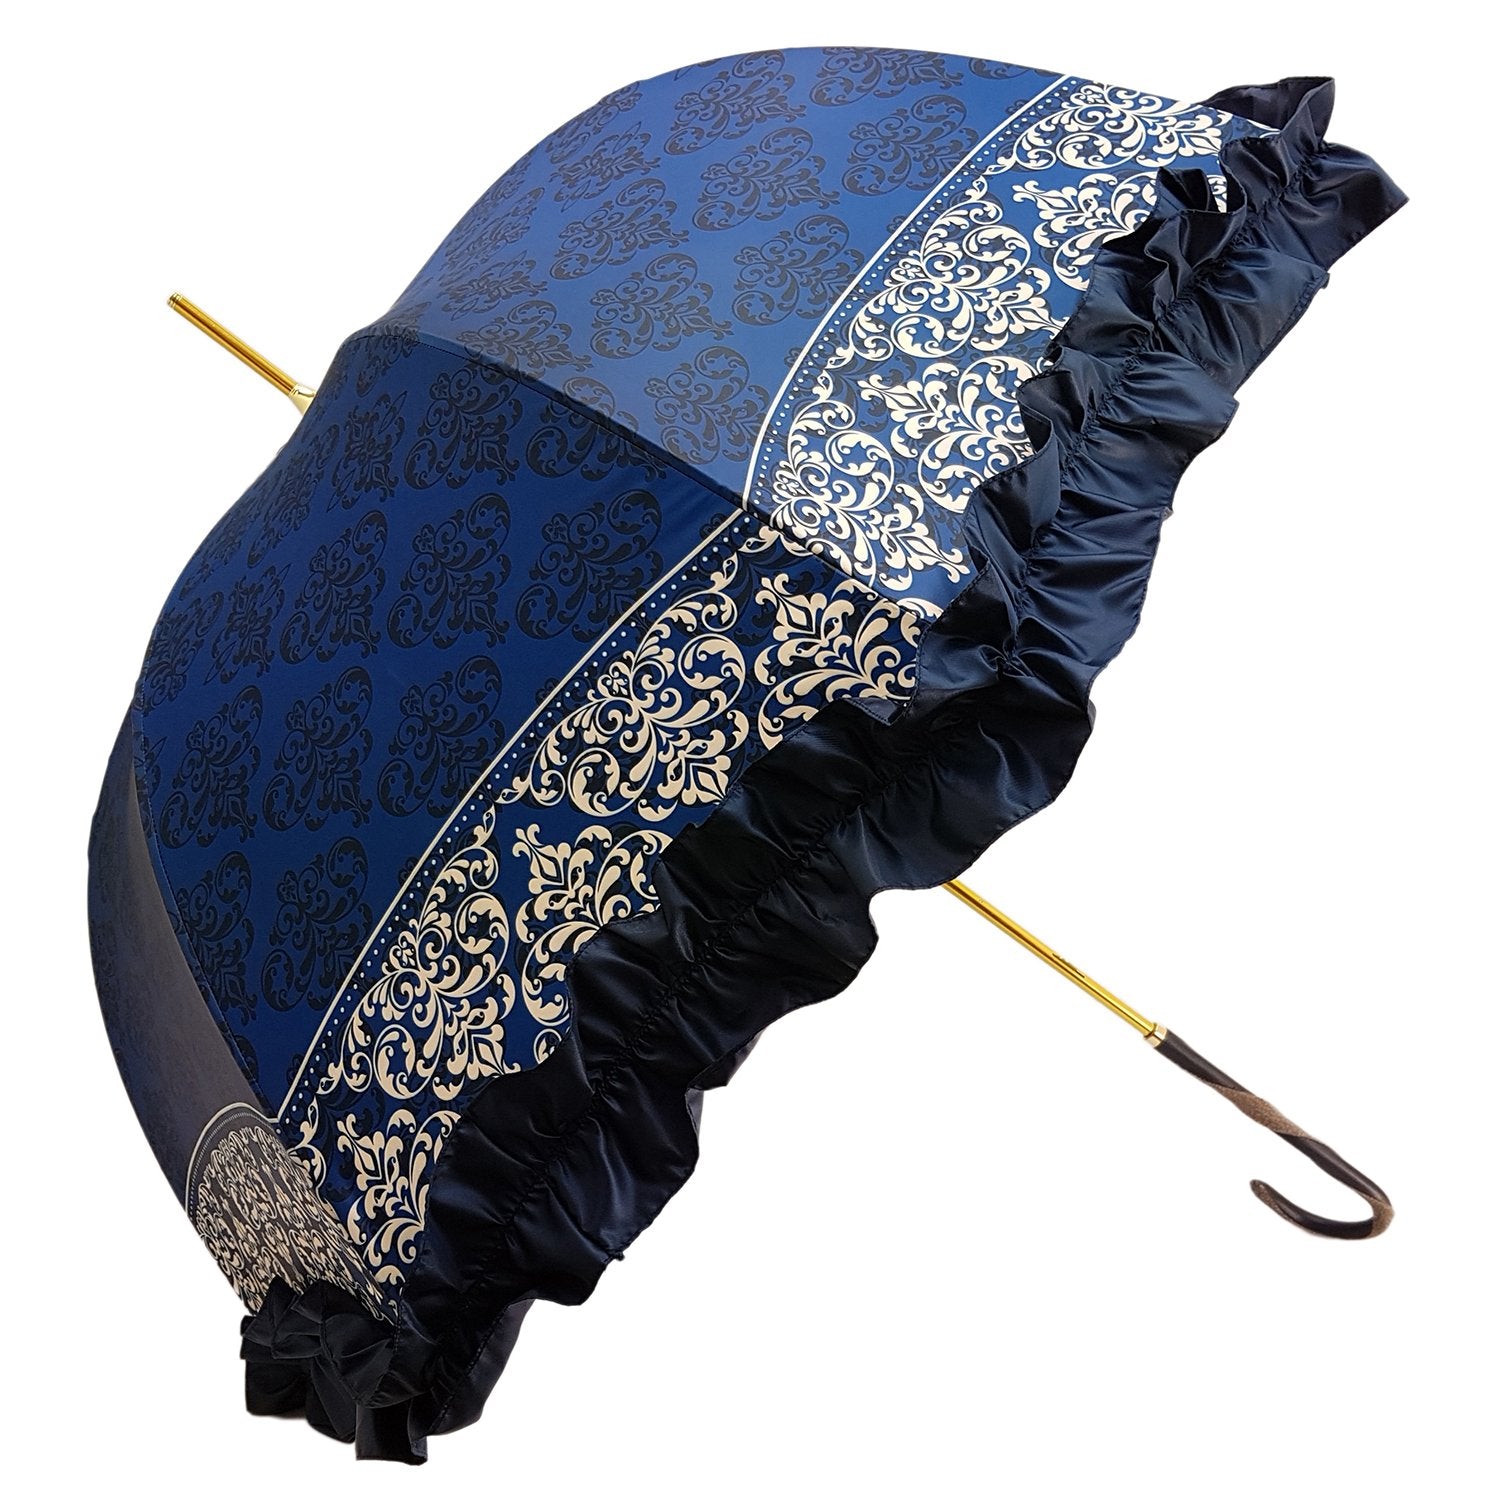 Women's umbrella Studied with a White & Black Pattern on a Blue Canopy - il-marchesato